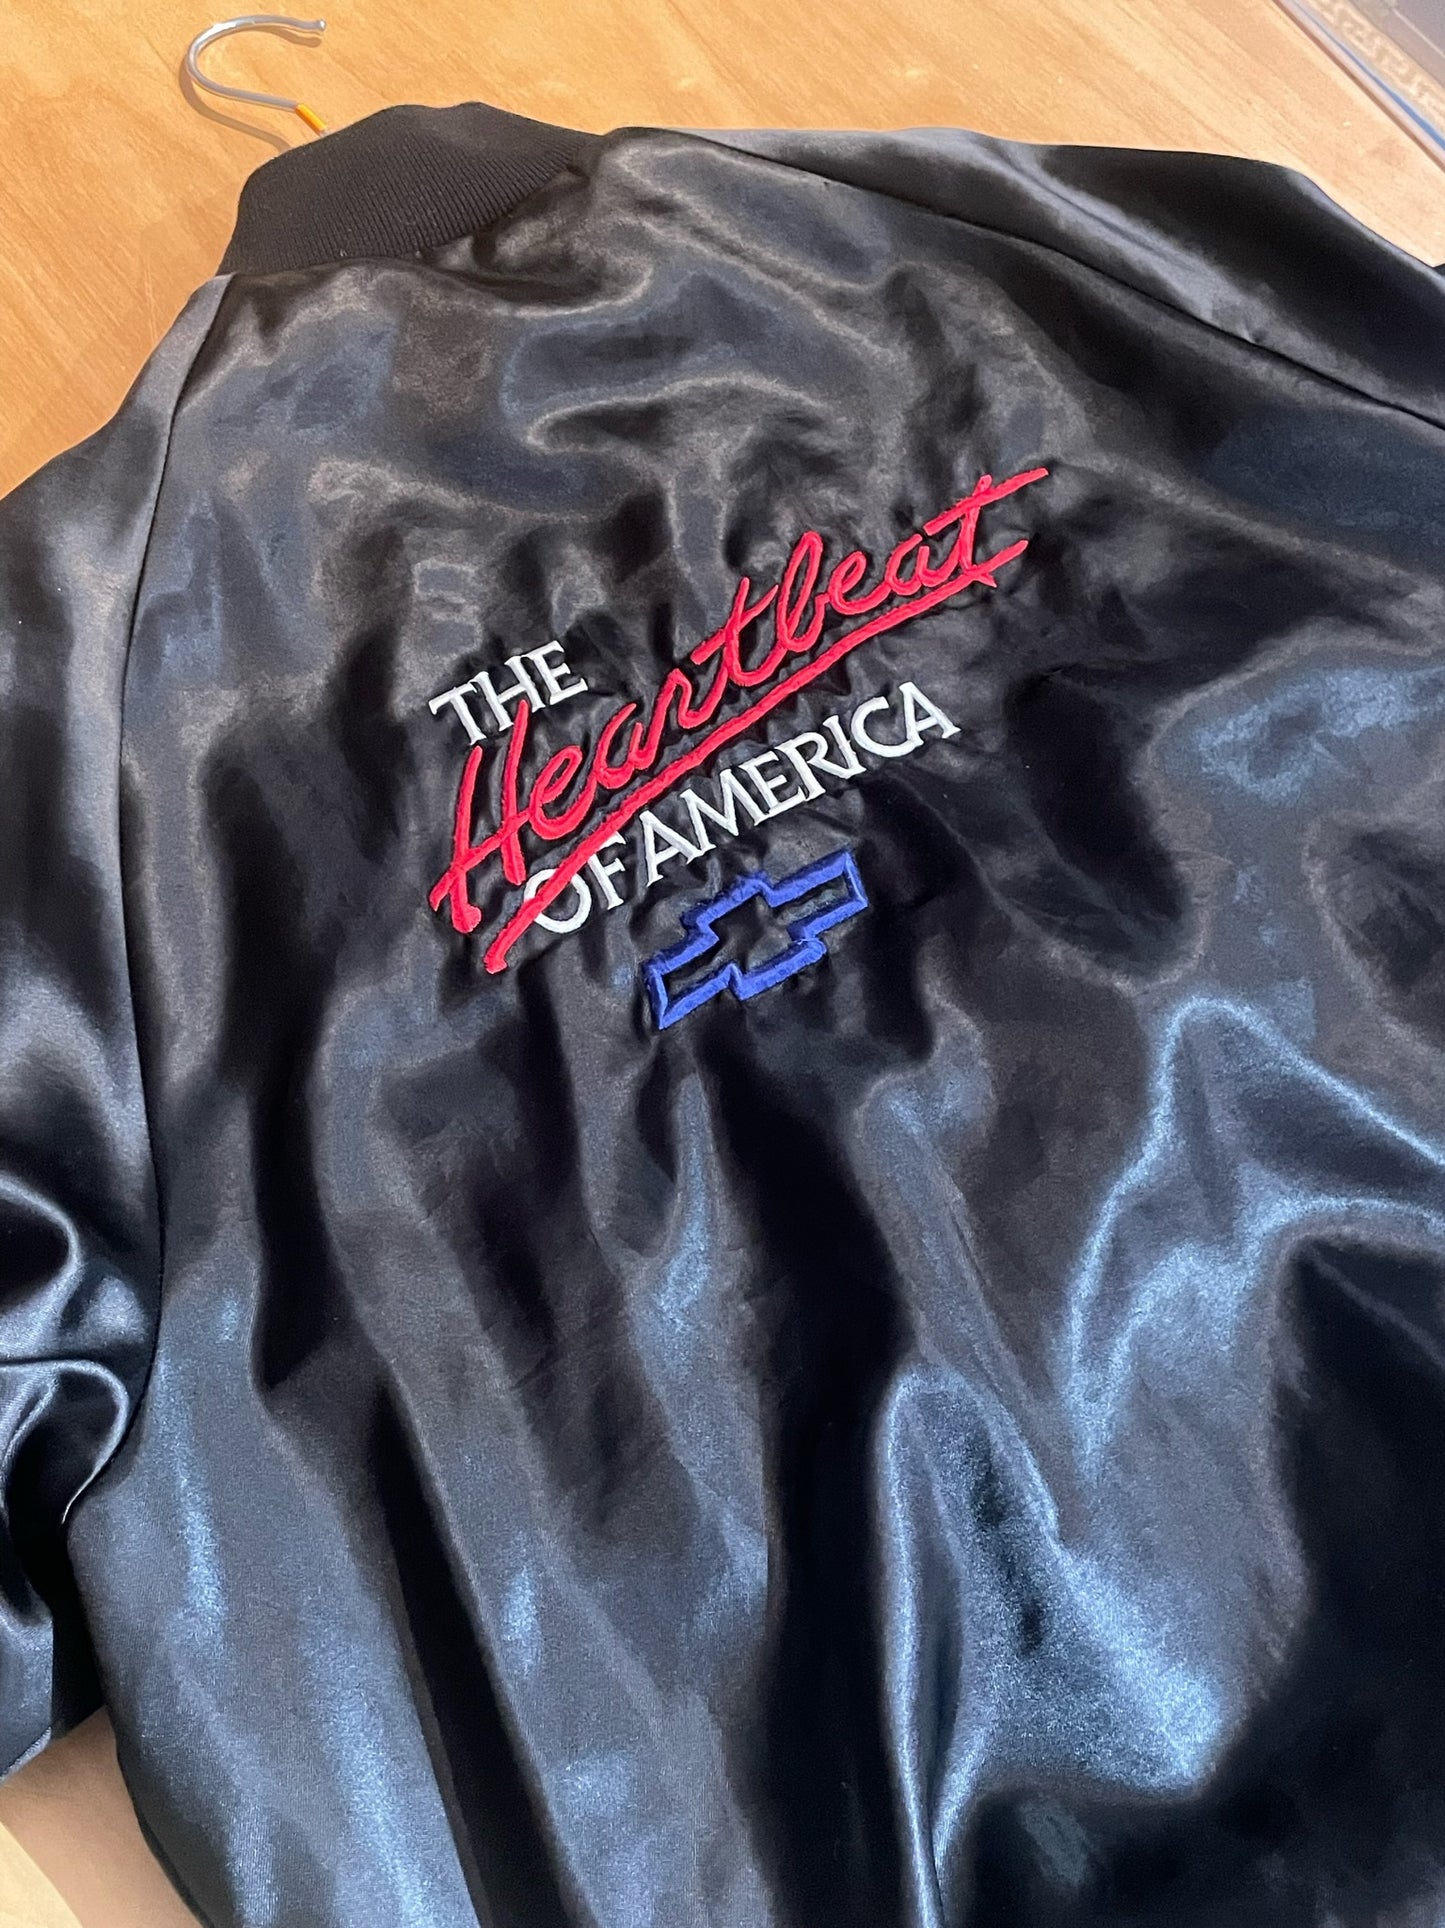 VINTAGE 80s CHEVROLET "THE HEARTBEAT OF AMERICA" MADE IN USA SATIN JACKET  SZ: L